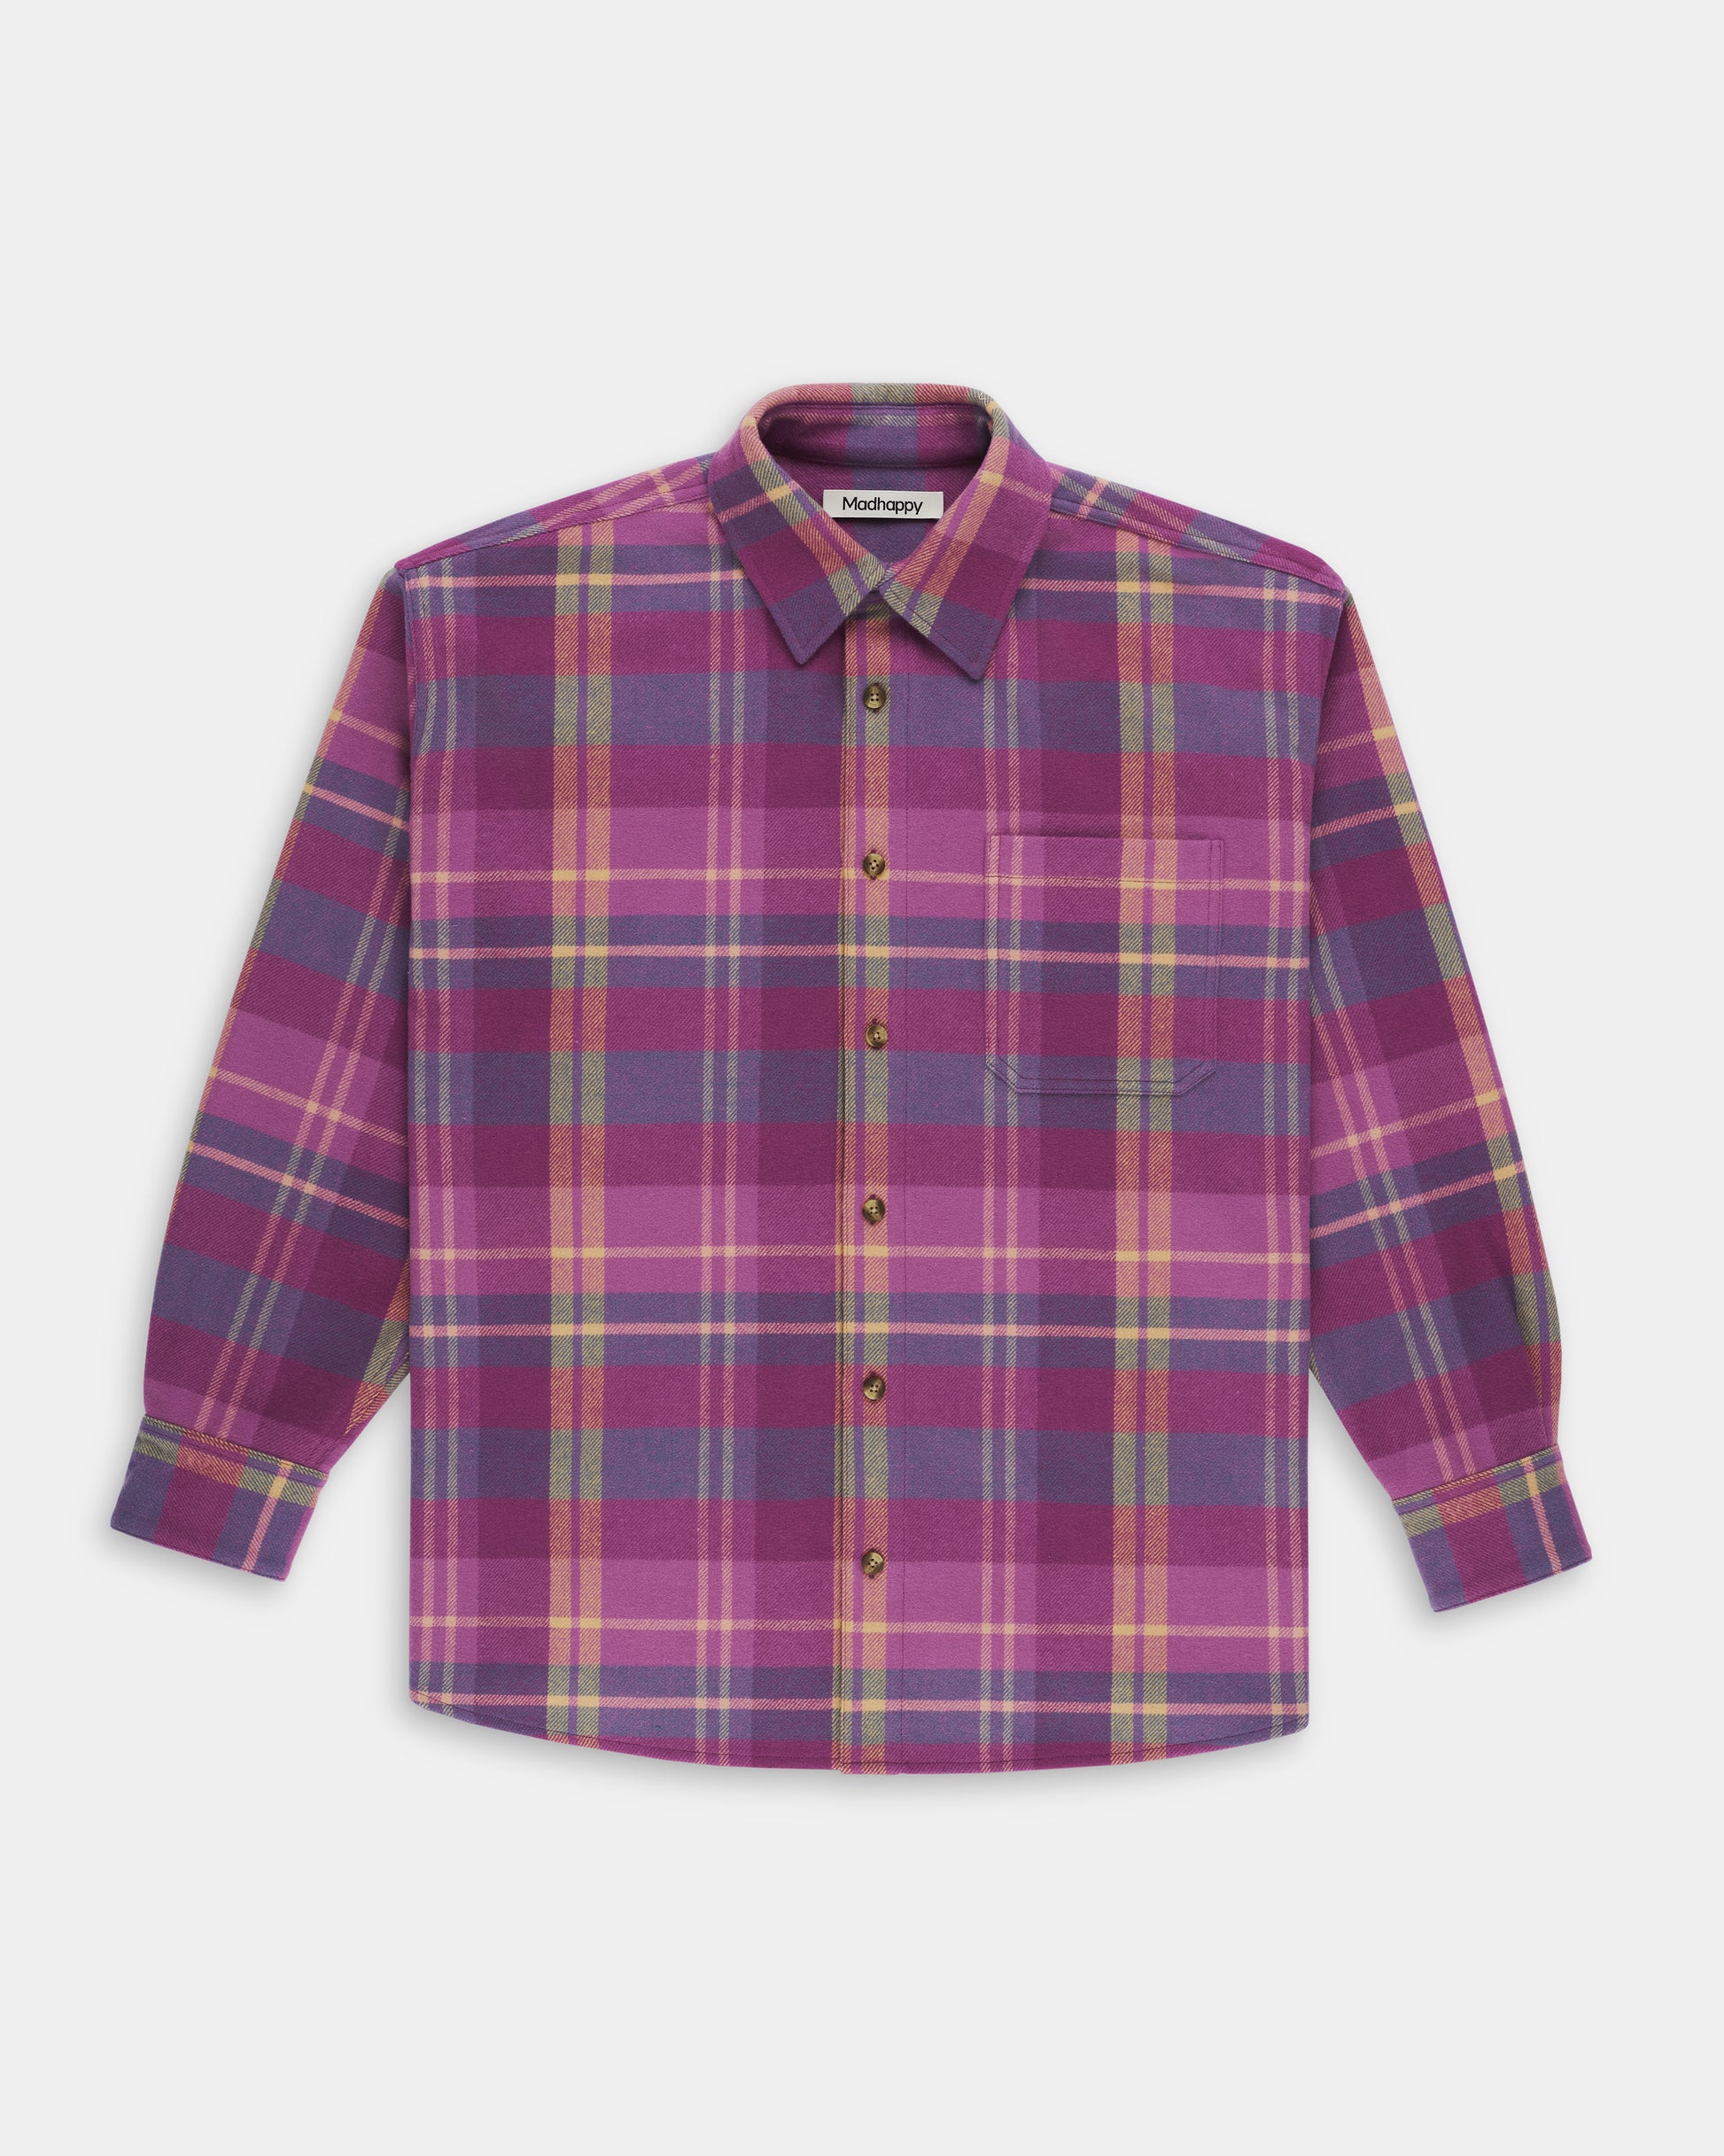 #berry-plaid - featured